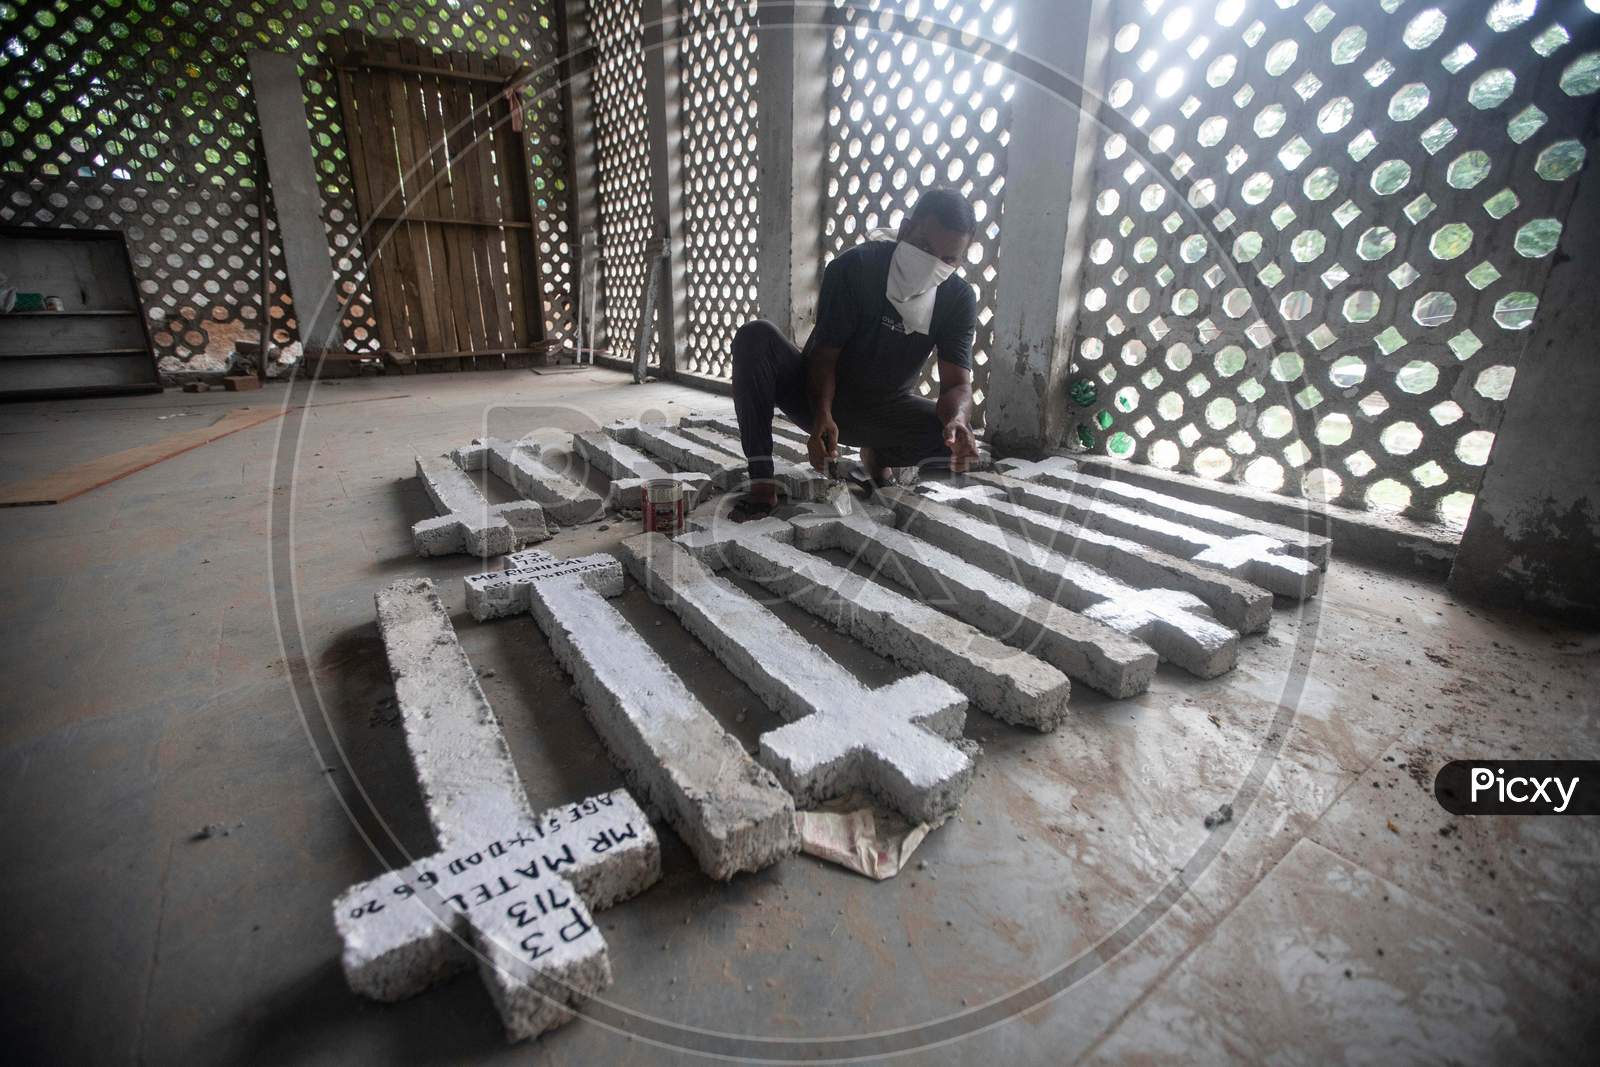 A Cemetery Worker Prepares Fresh Grave Markers For Covid-19 Victims  At Mangolpuri Cemetery Amid The Covid-19 Pandemic On July 1, 2020 In New Delhi, India.